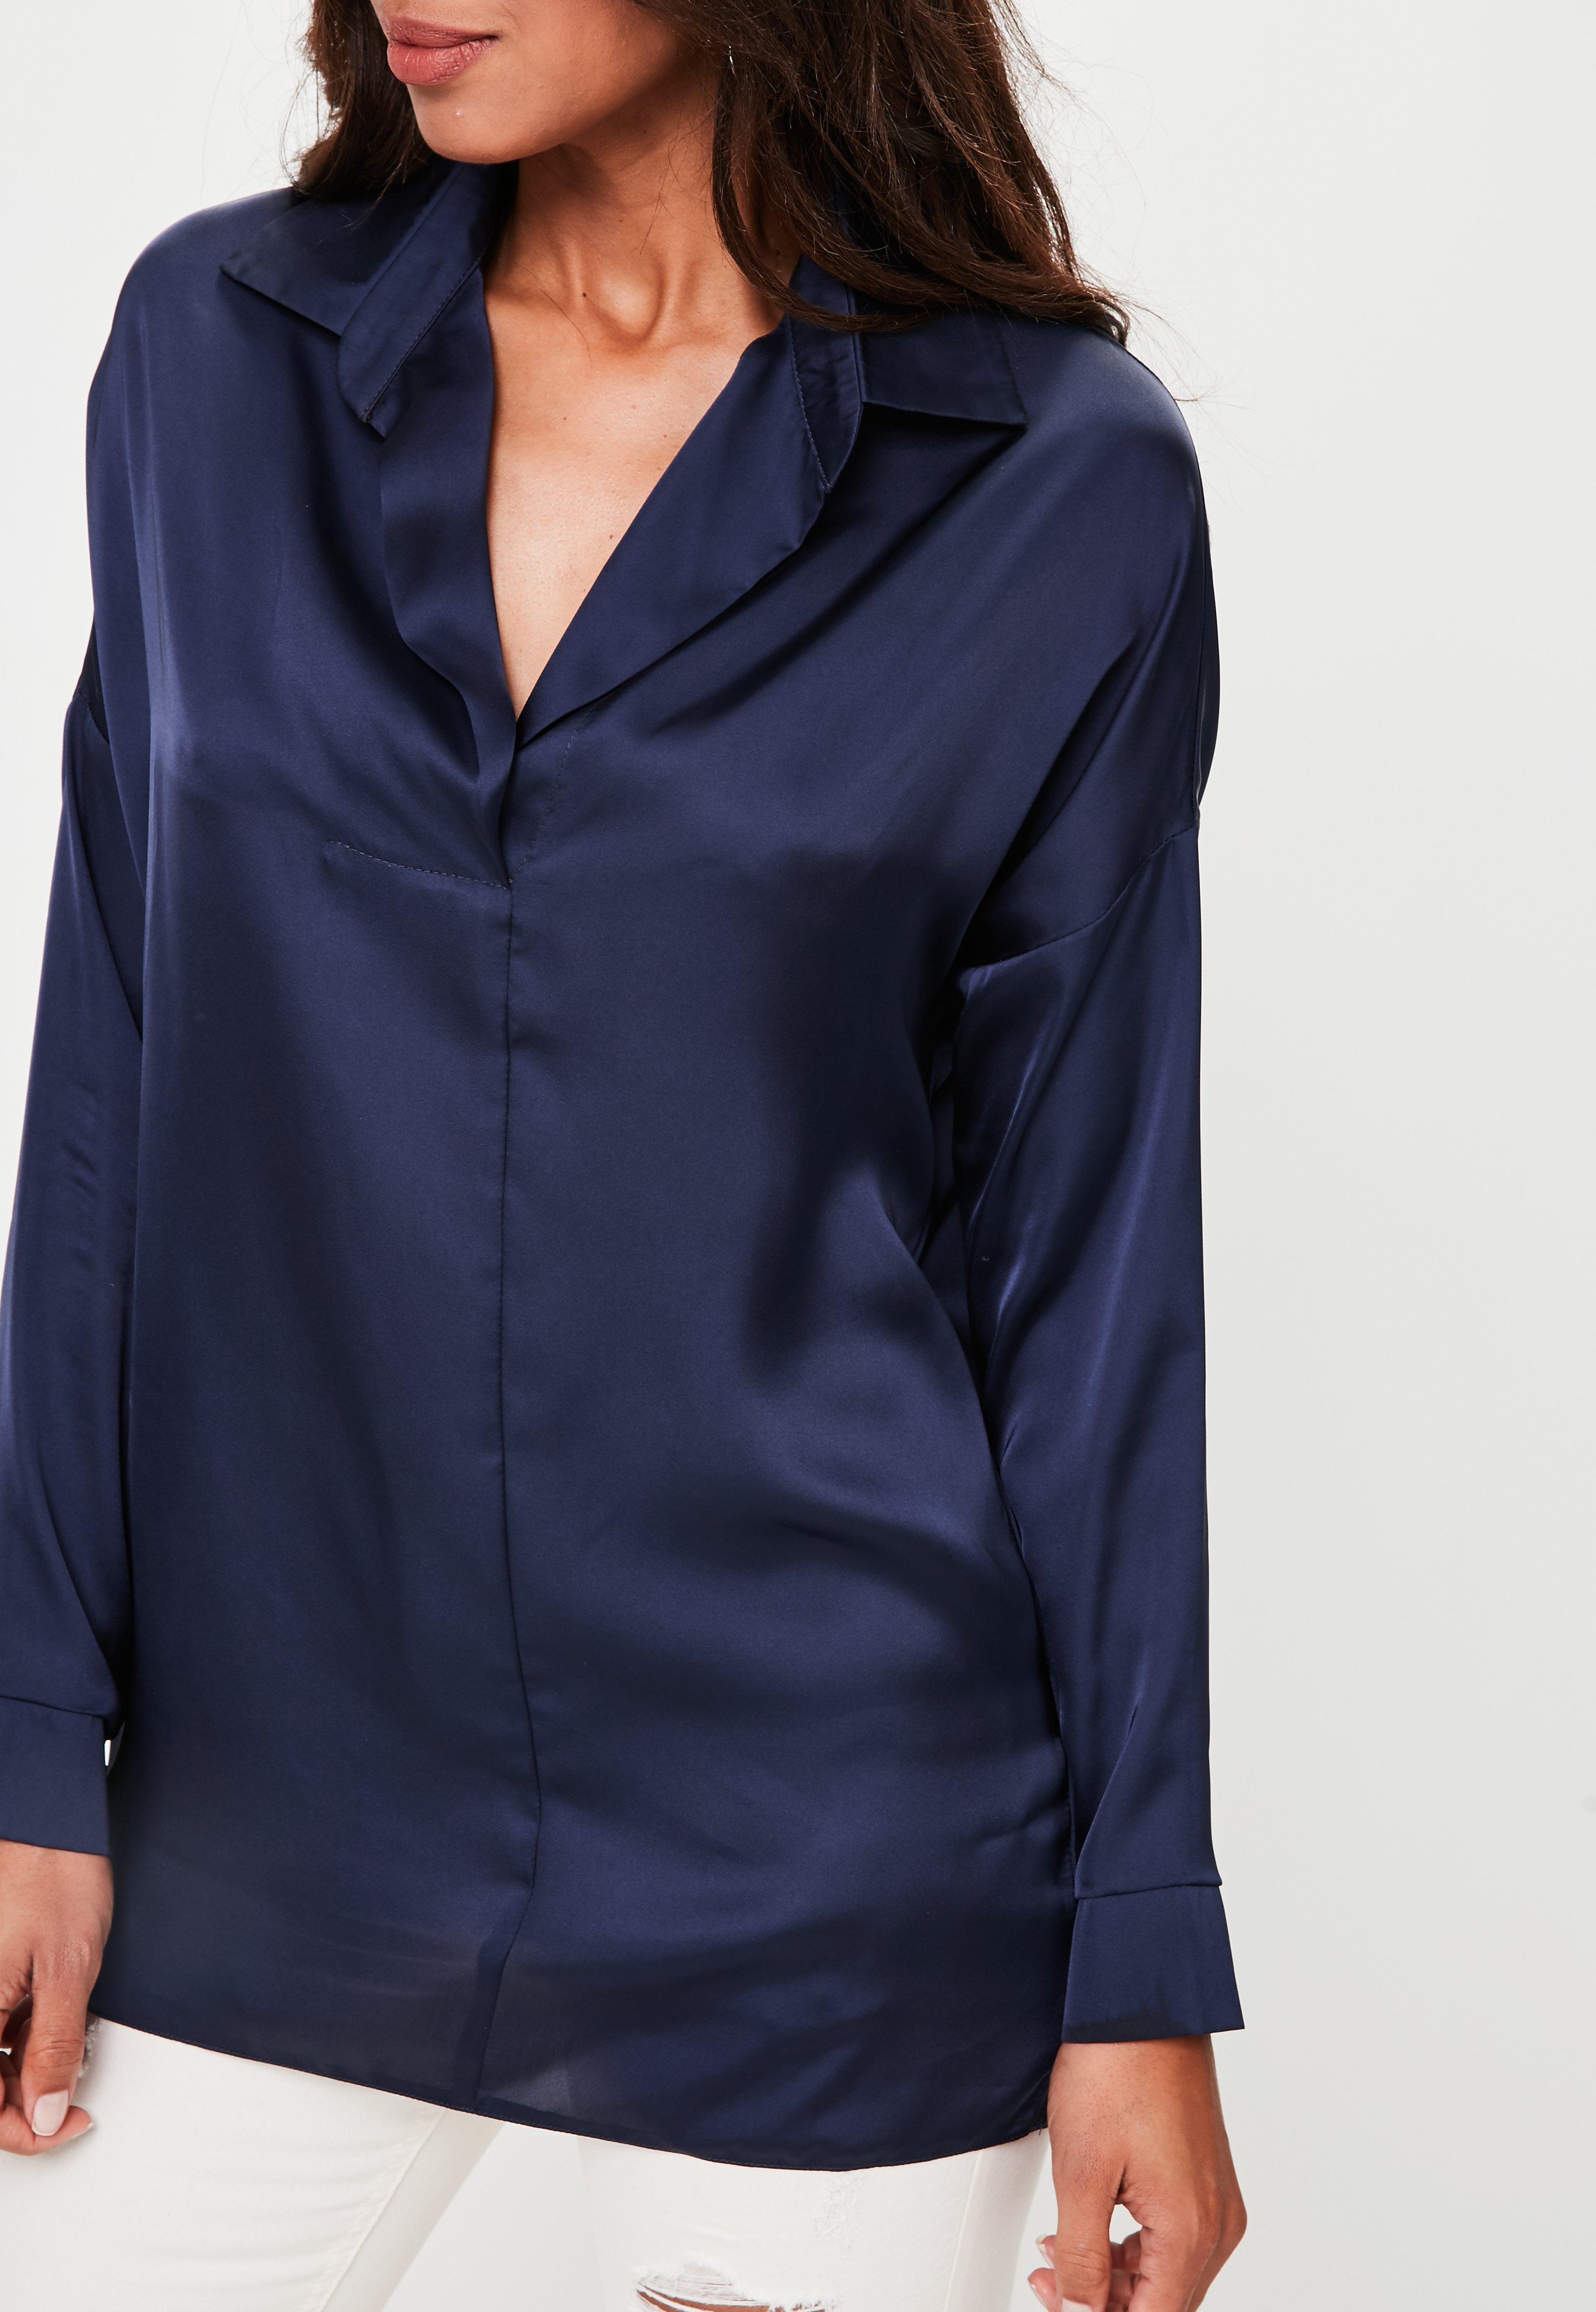 Missguided Navy Satin Oversized Shirt in Blue - Lyst